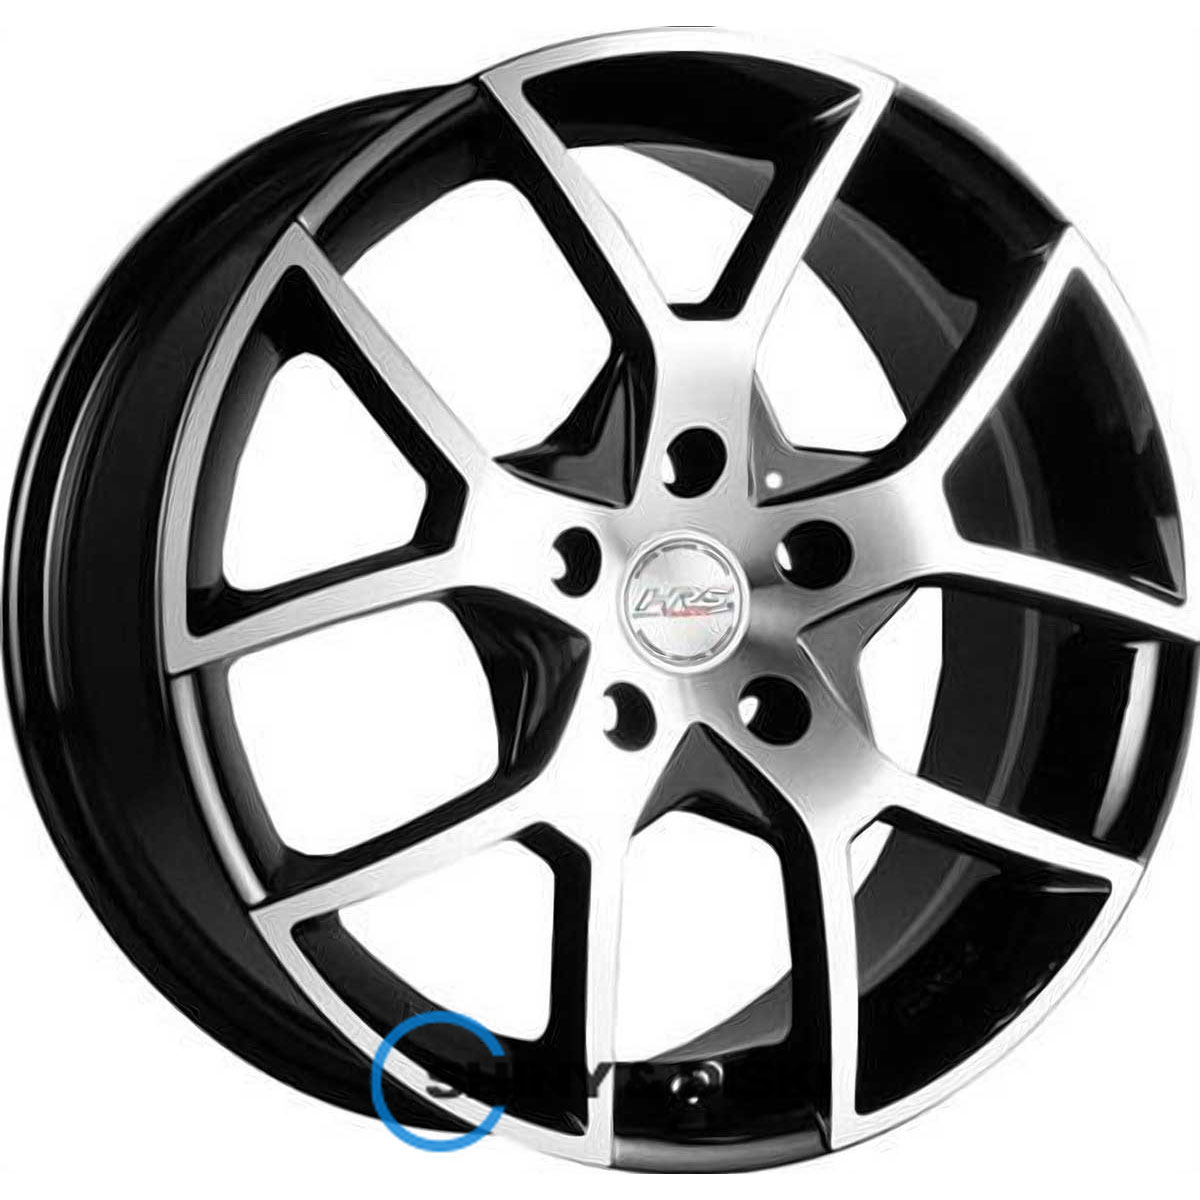 rs tuning h-466 bkfp r14 w6 pcd4x98 et35 dia58.6